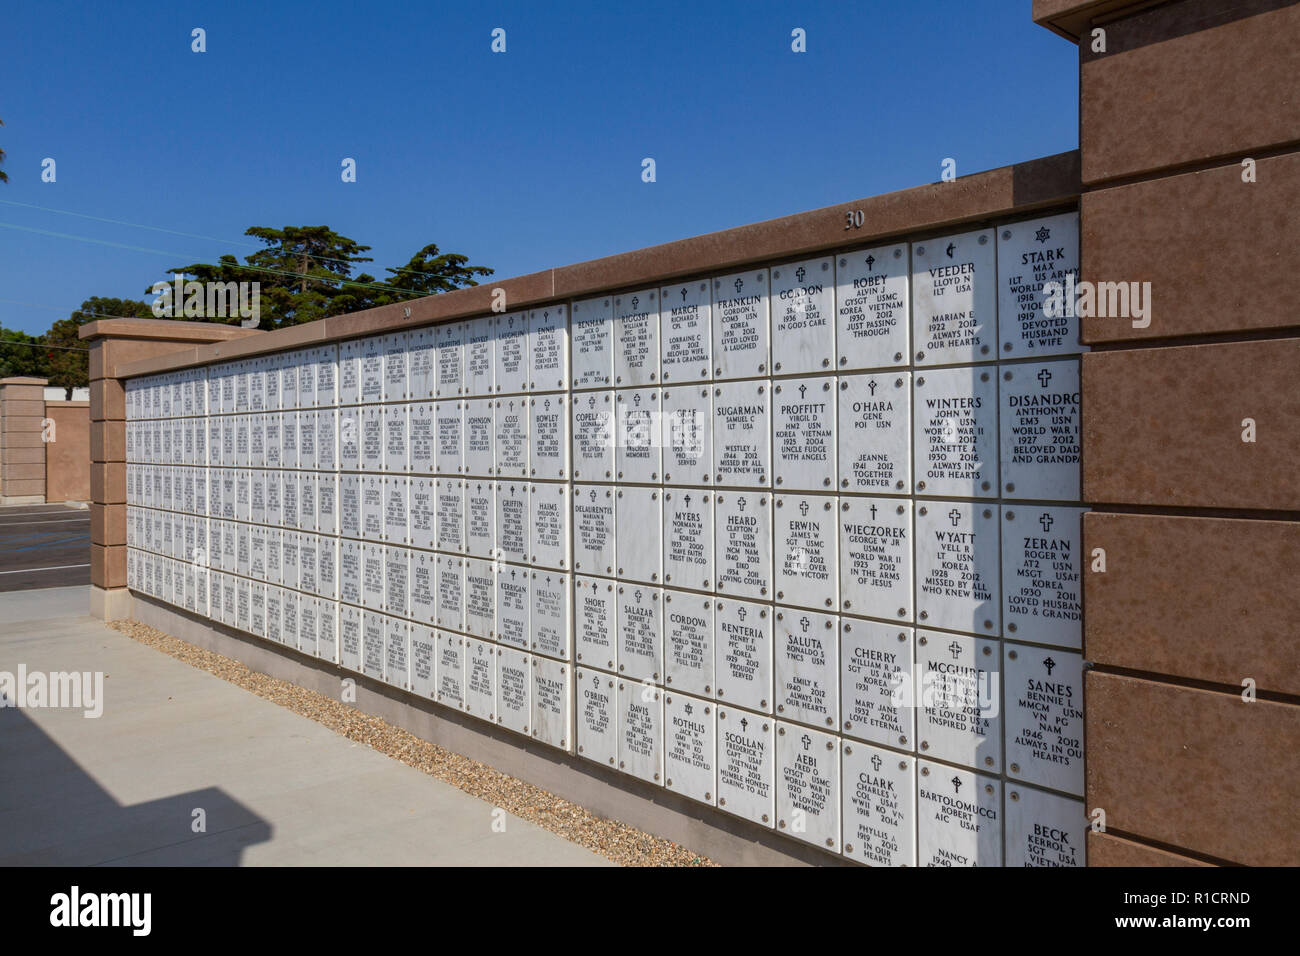 Memorial plaques in the Fort Rosecrans National Cemetery, Cabrillo Memorial Dr, San Diego, California, United States. Stock Photo